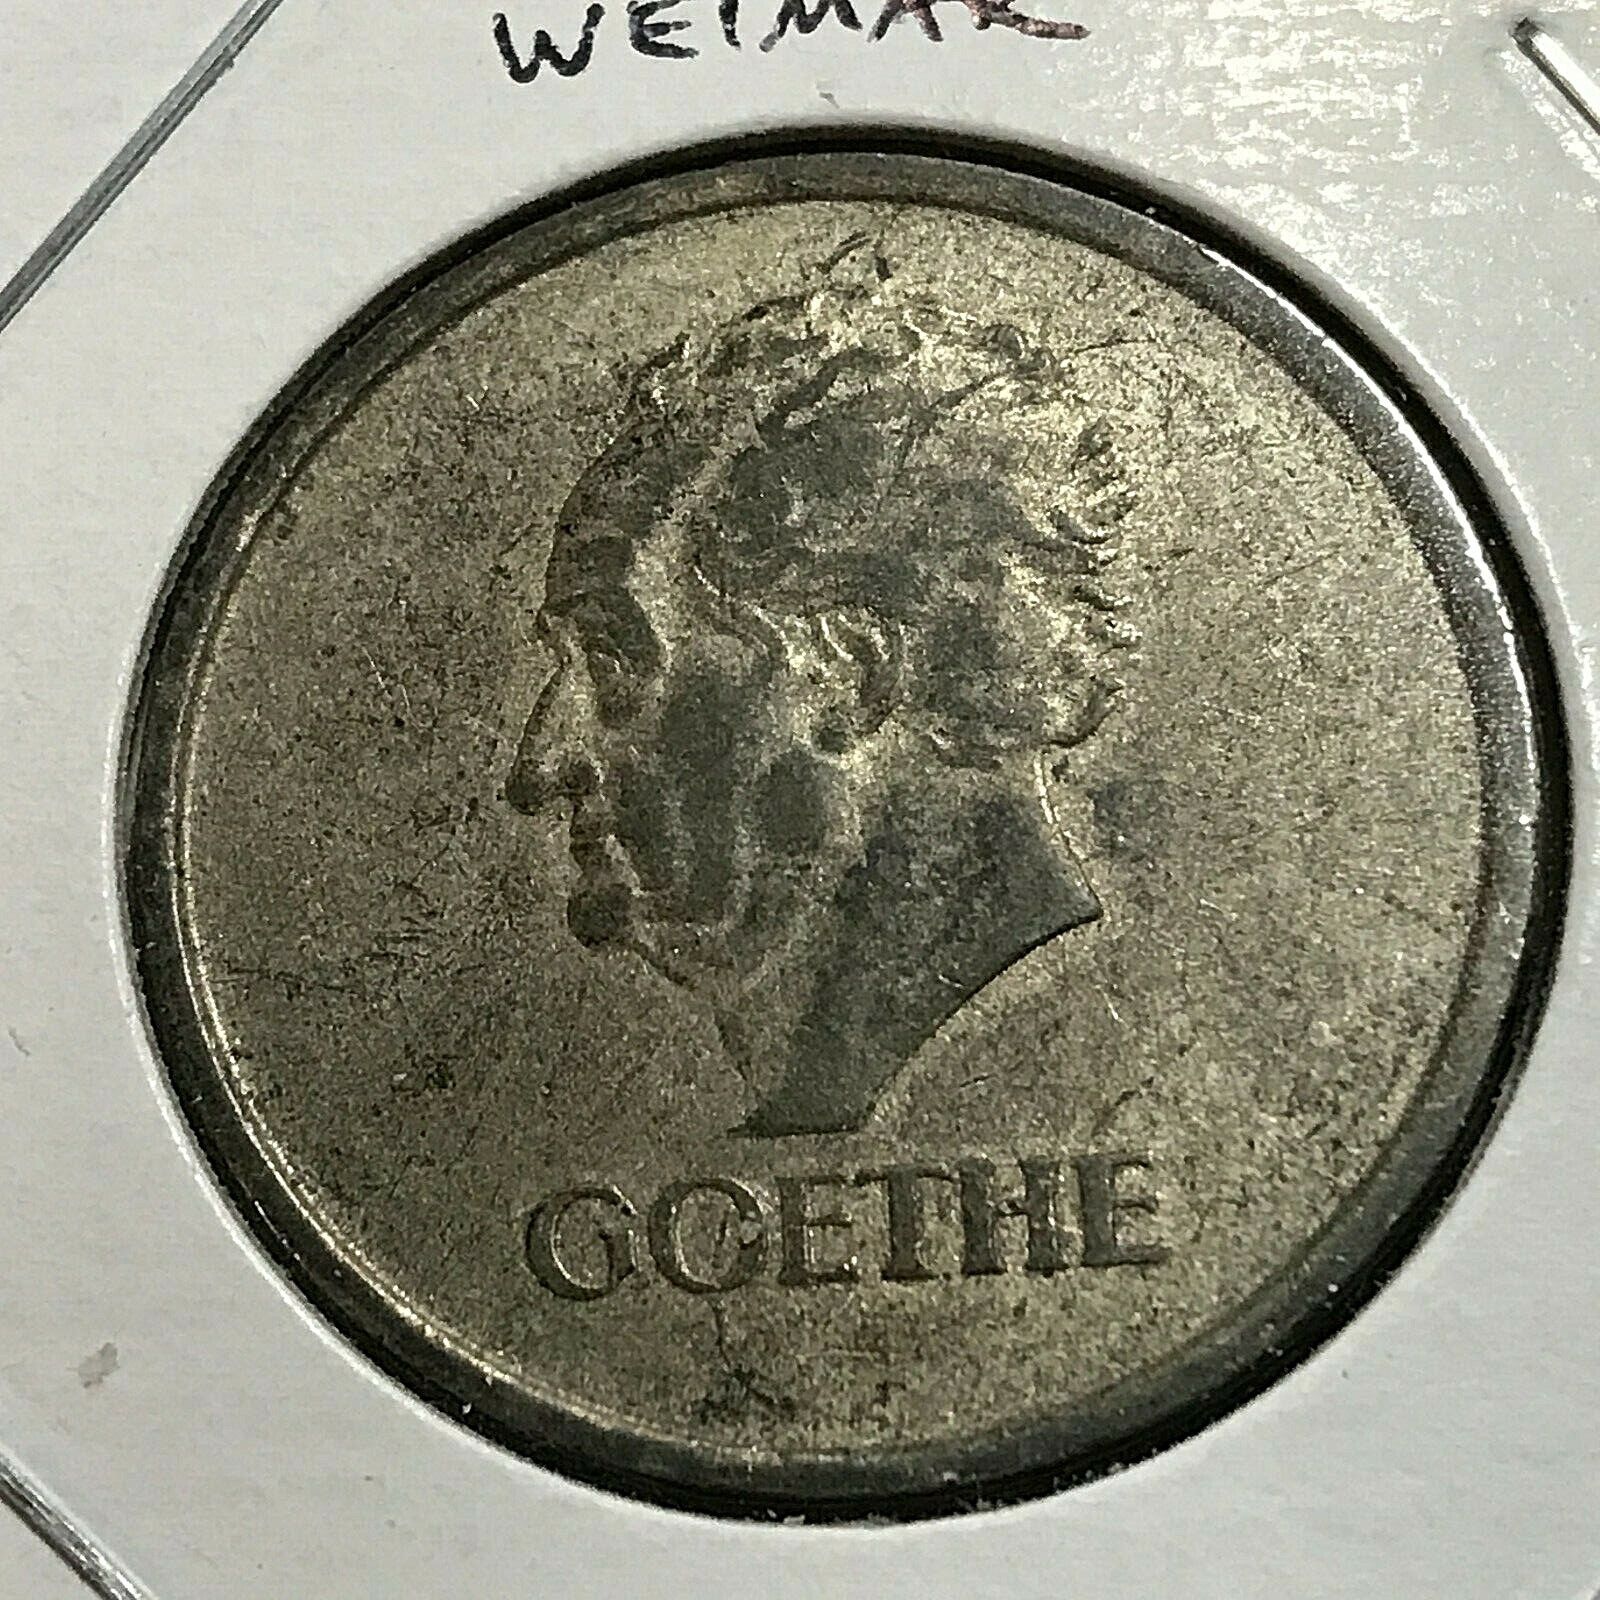 1932-A GERMANY WEIMAR GOETHE SILVER 3 REICHSMARK SCARCE COIN